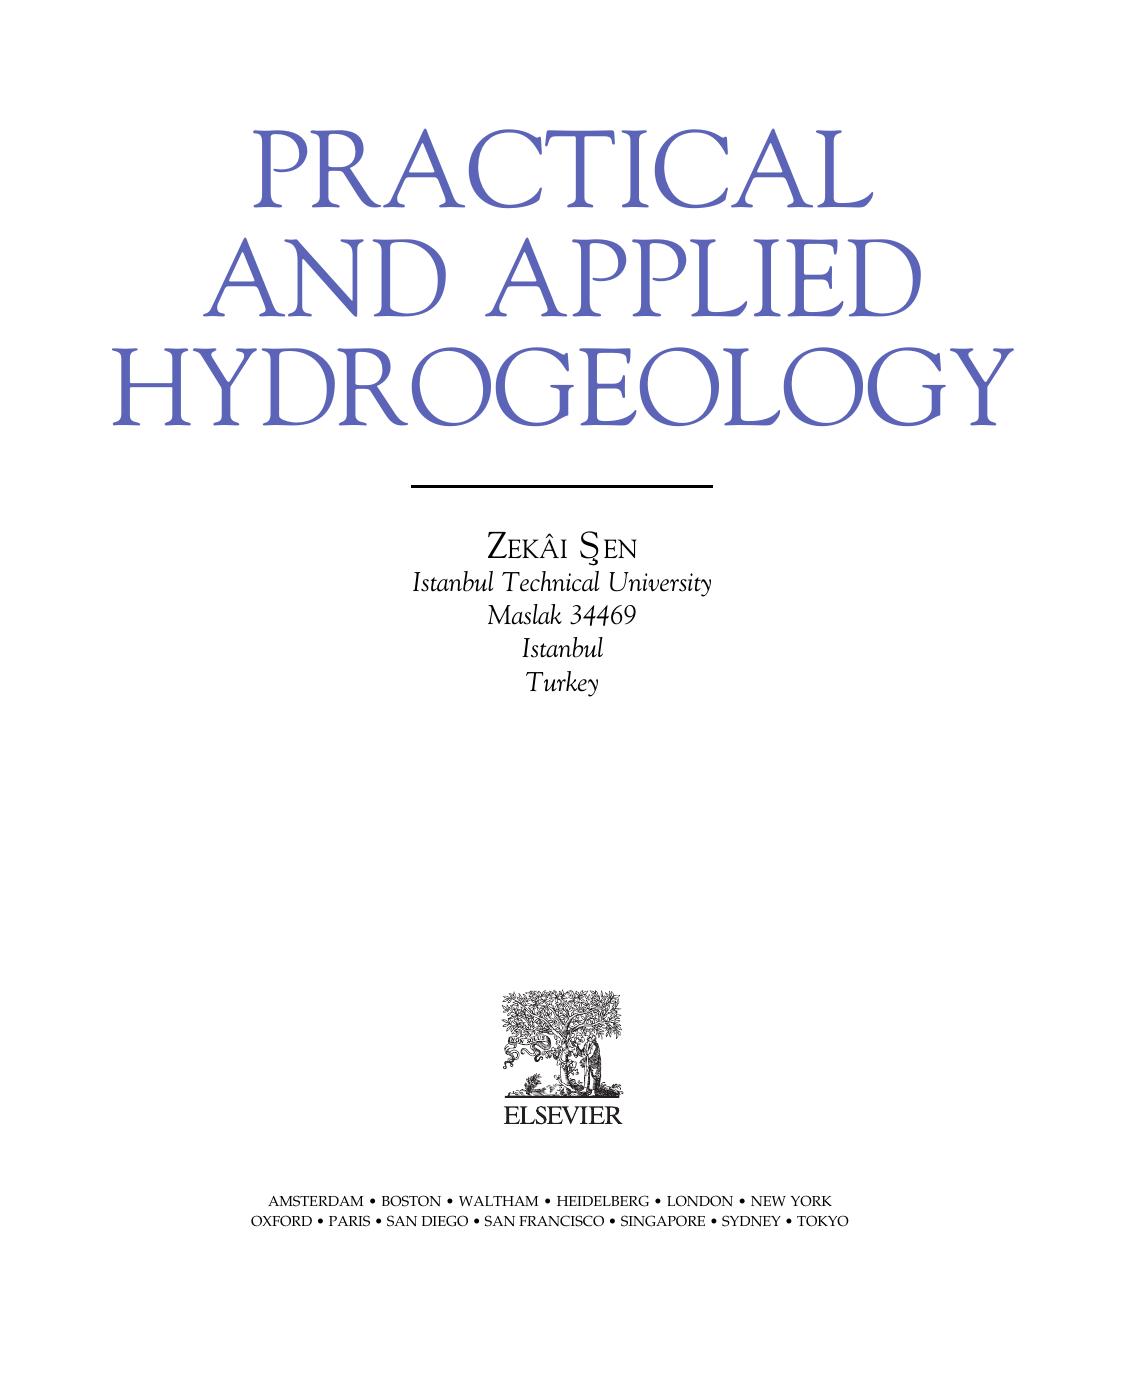 Practical and applied hydrogeology 2015